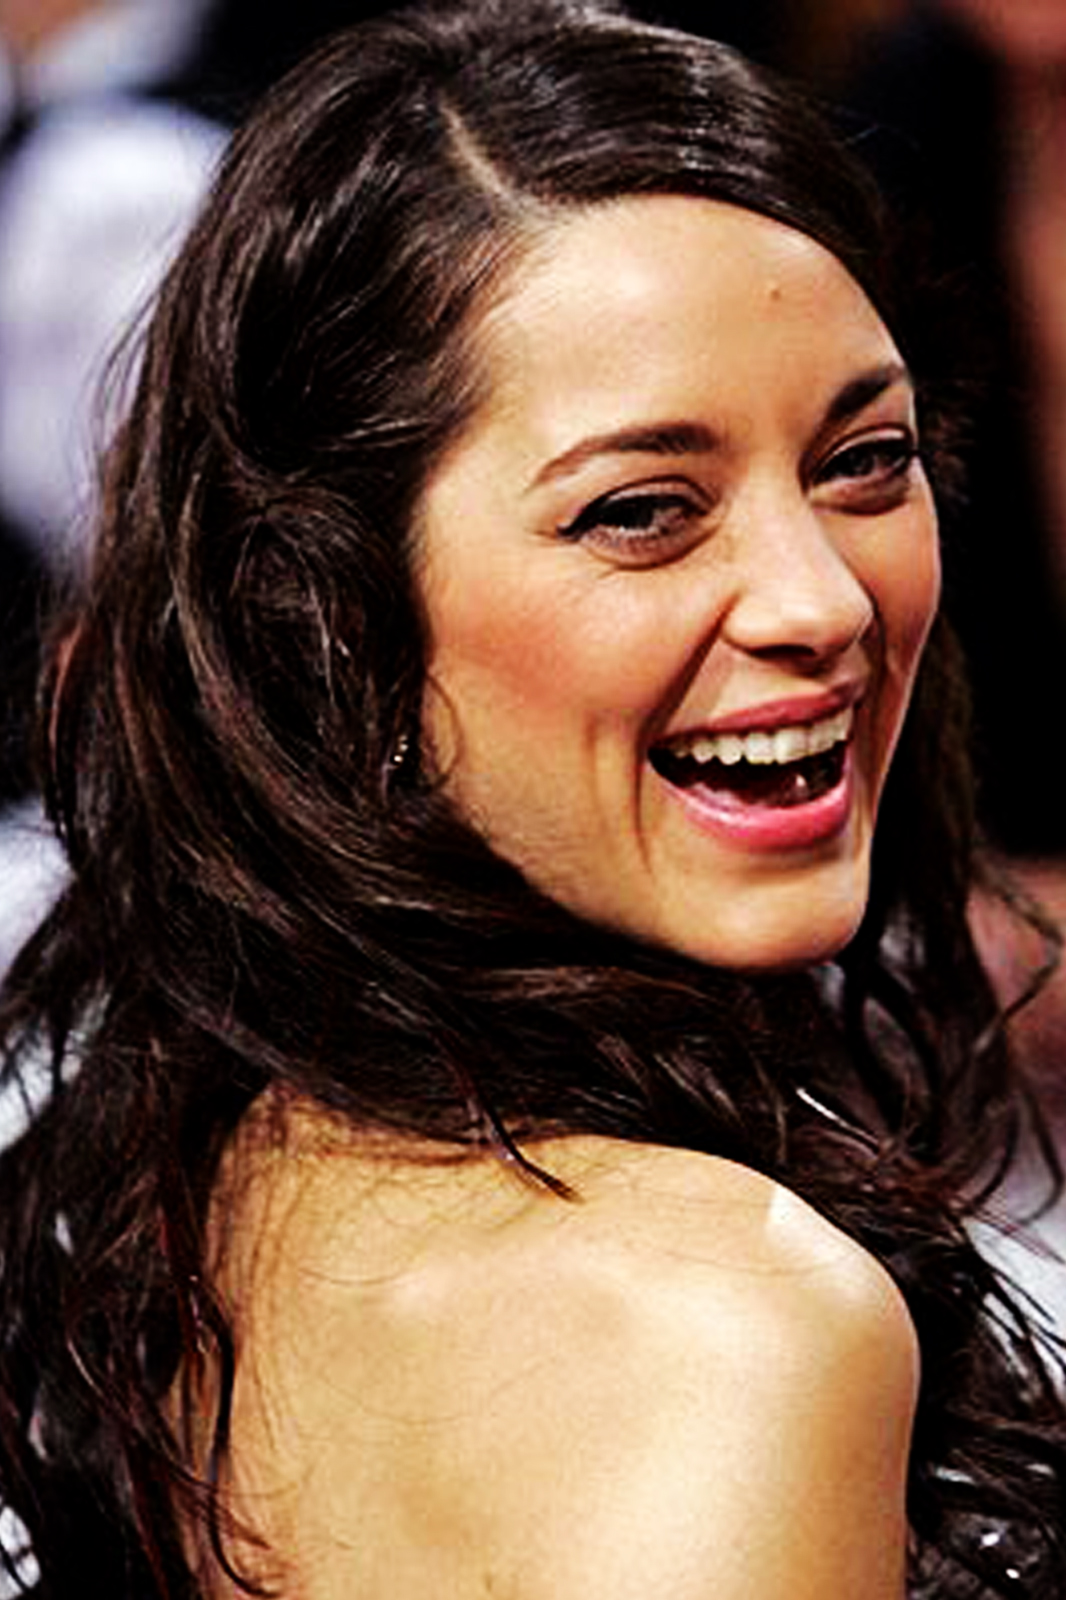 What do people named <b>Marion look</b> like - Marion-Cotillard-Biography-1